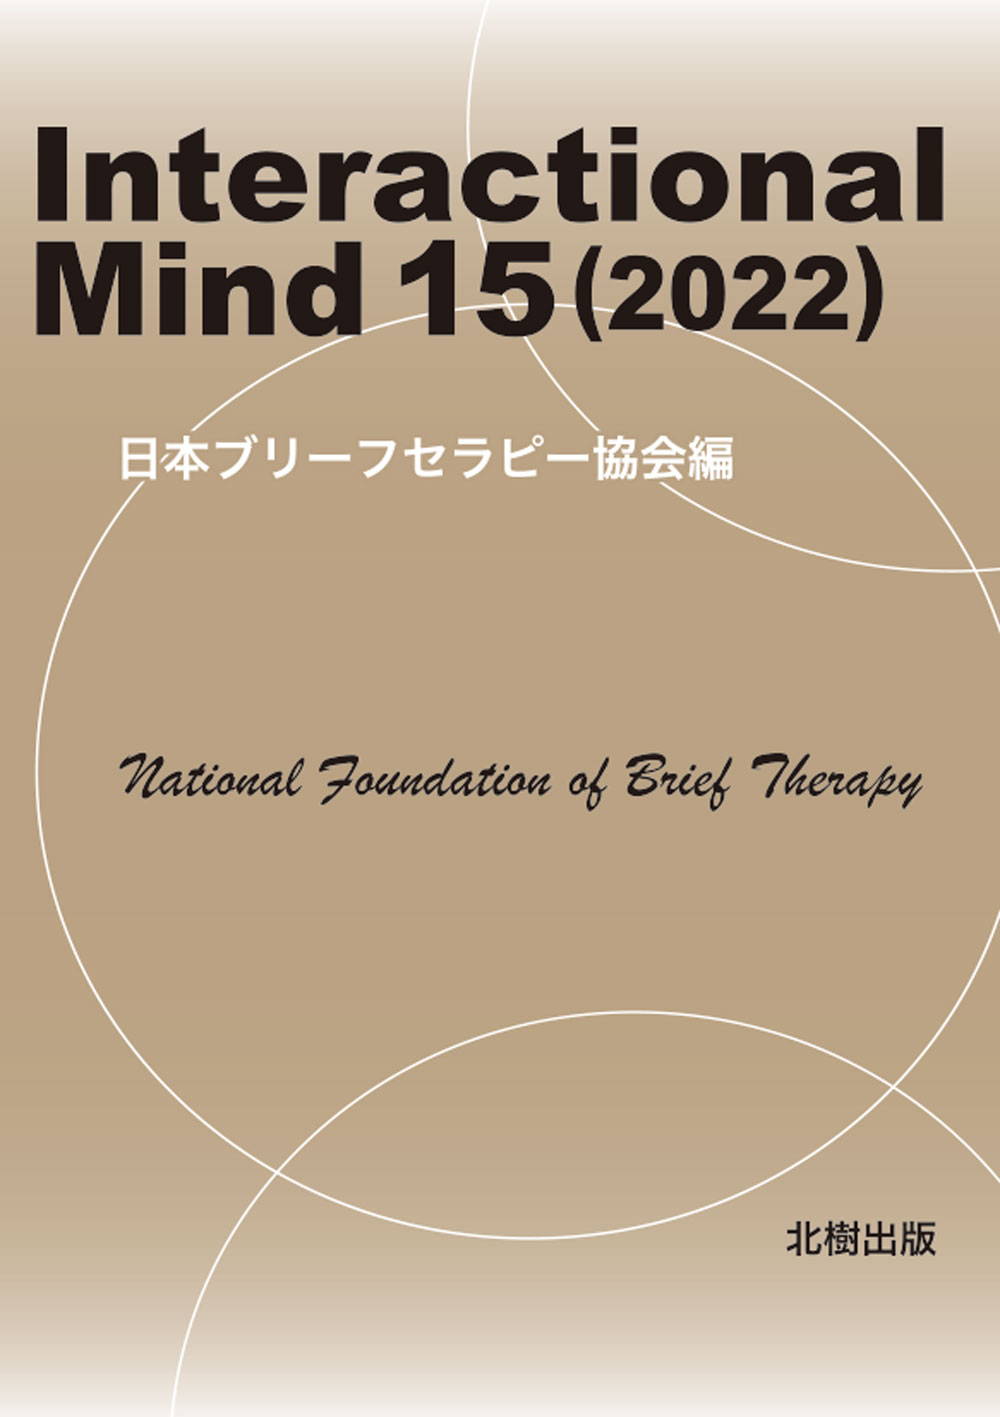 Interactional Mind 15（2022）